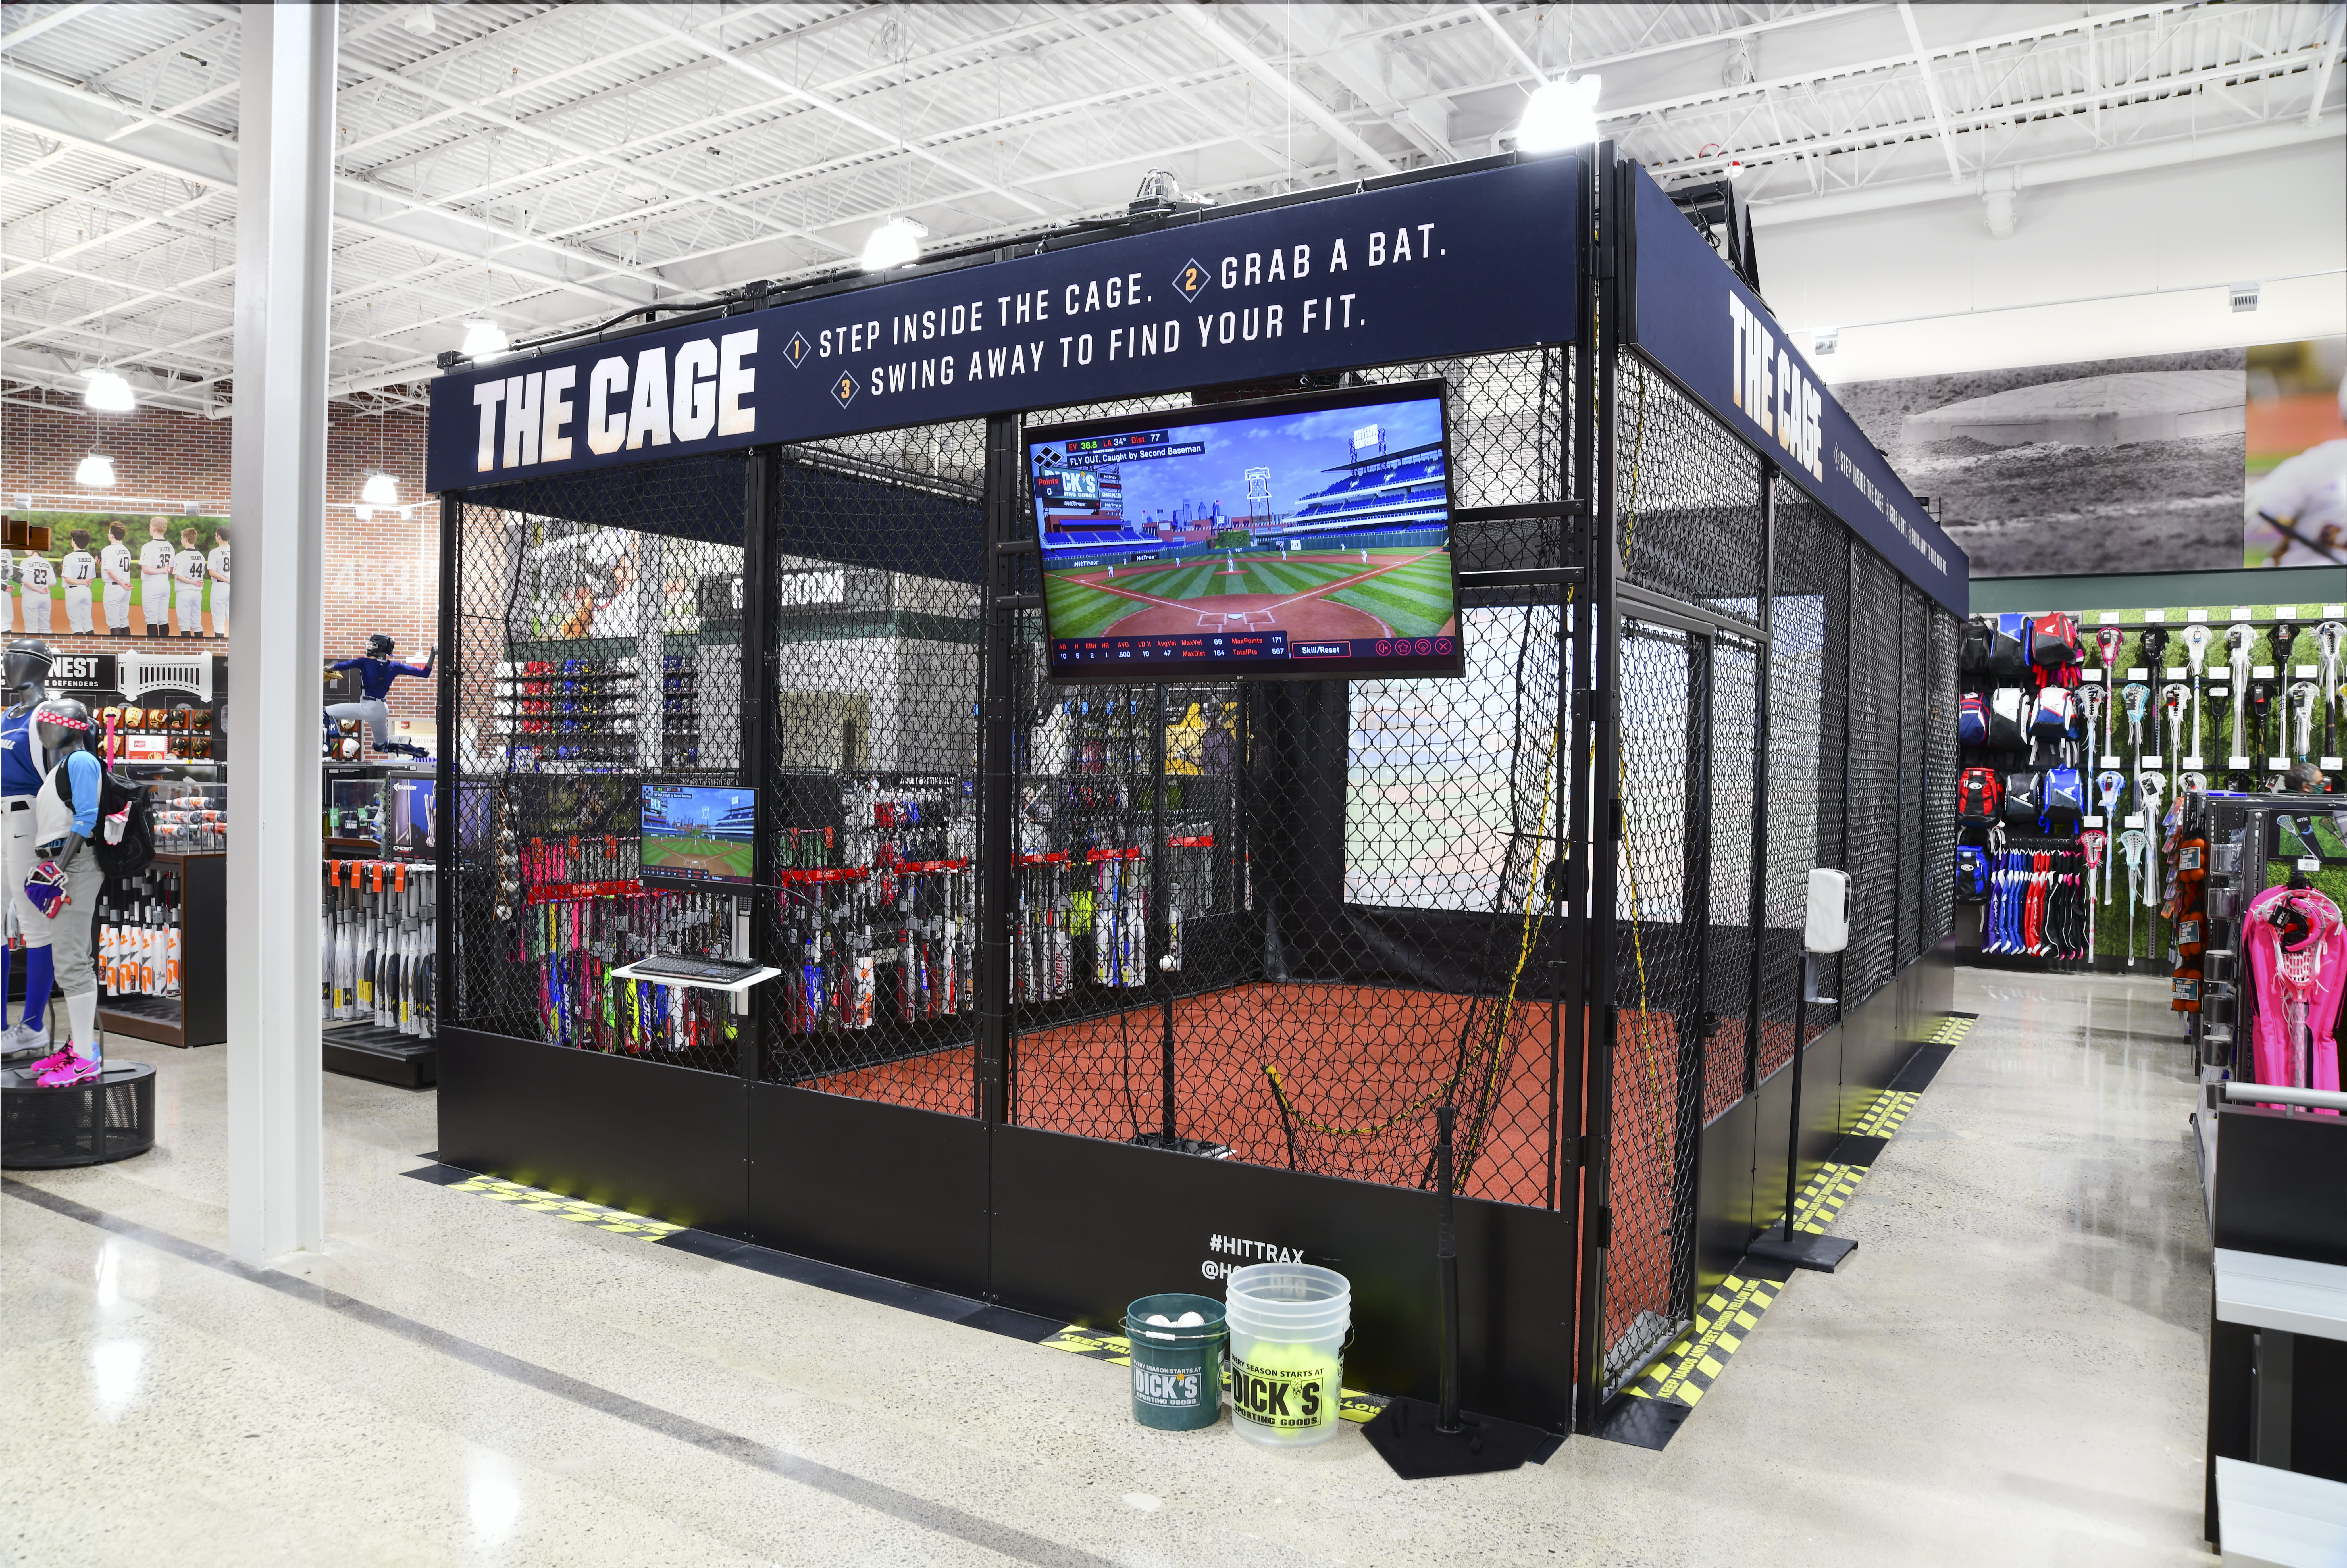 Dick’s Sporting Items’ new retailer has a driving vary and out of doors monitor